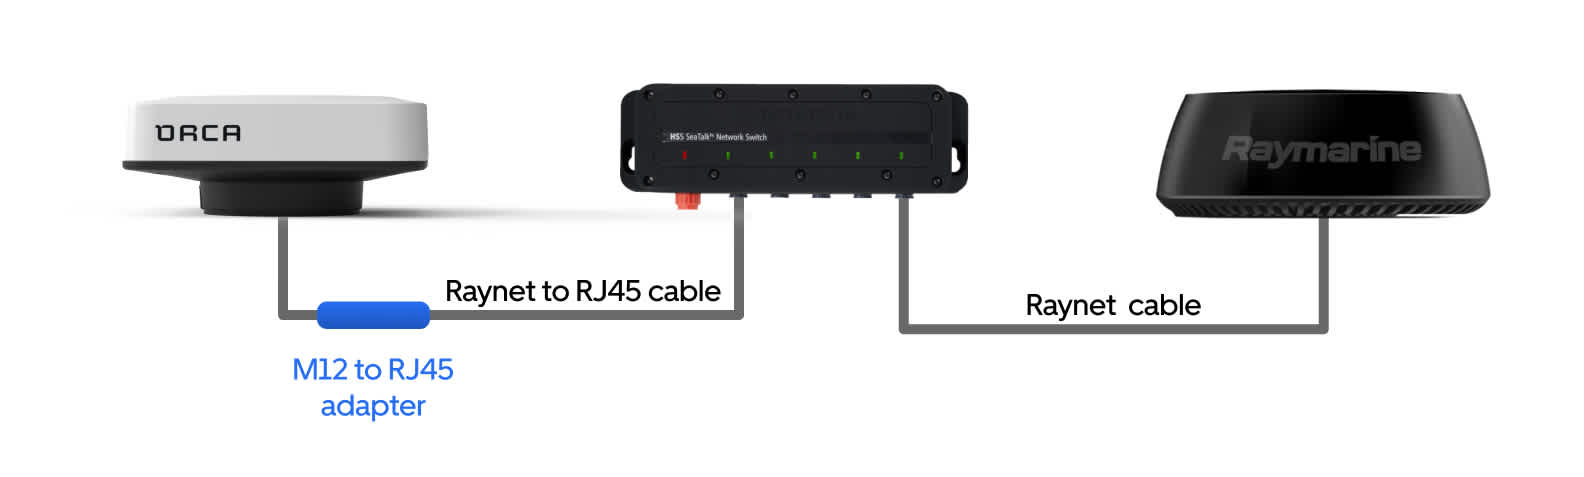 Connection via an ethernet switch allows Orca Core 2 to control Quantum radars together with a Raymarine Axiom.